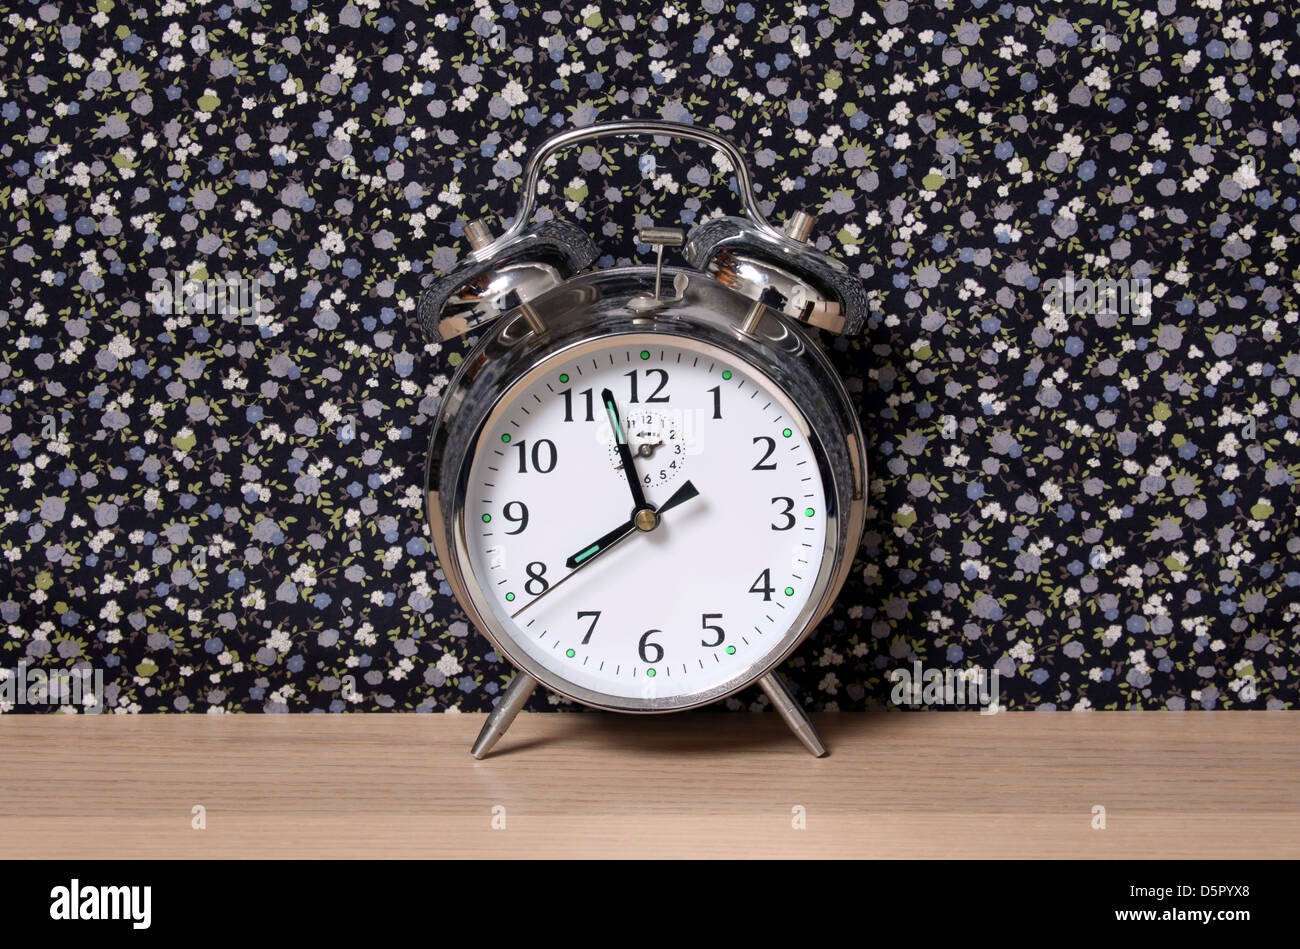 Old style alarm clock, on a dresser in front of floral wallpaper. Time set at just before 8. Stock Photo